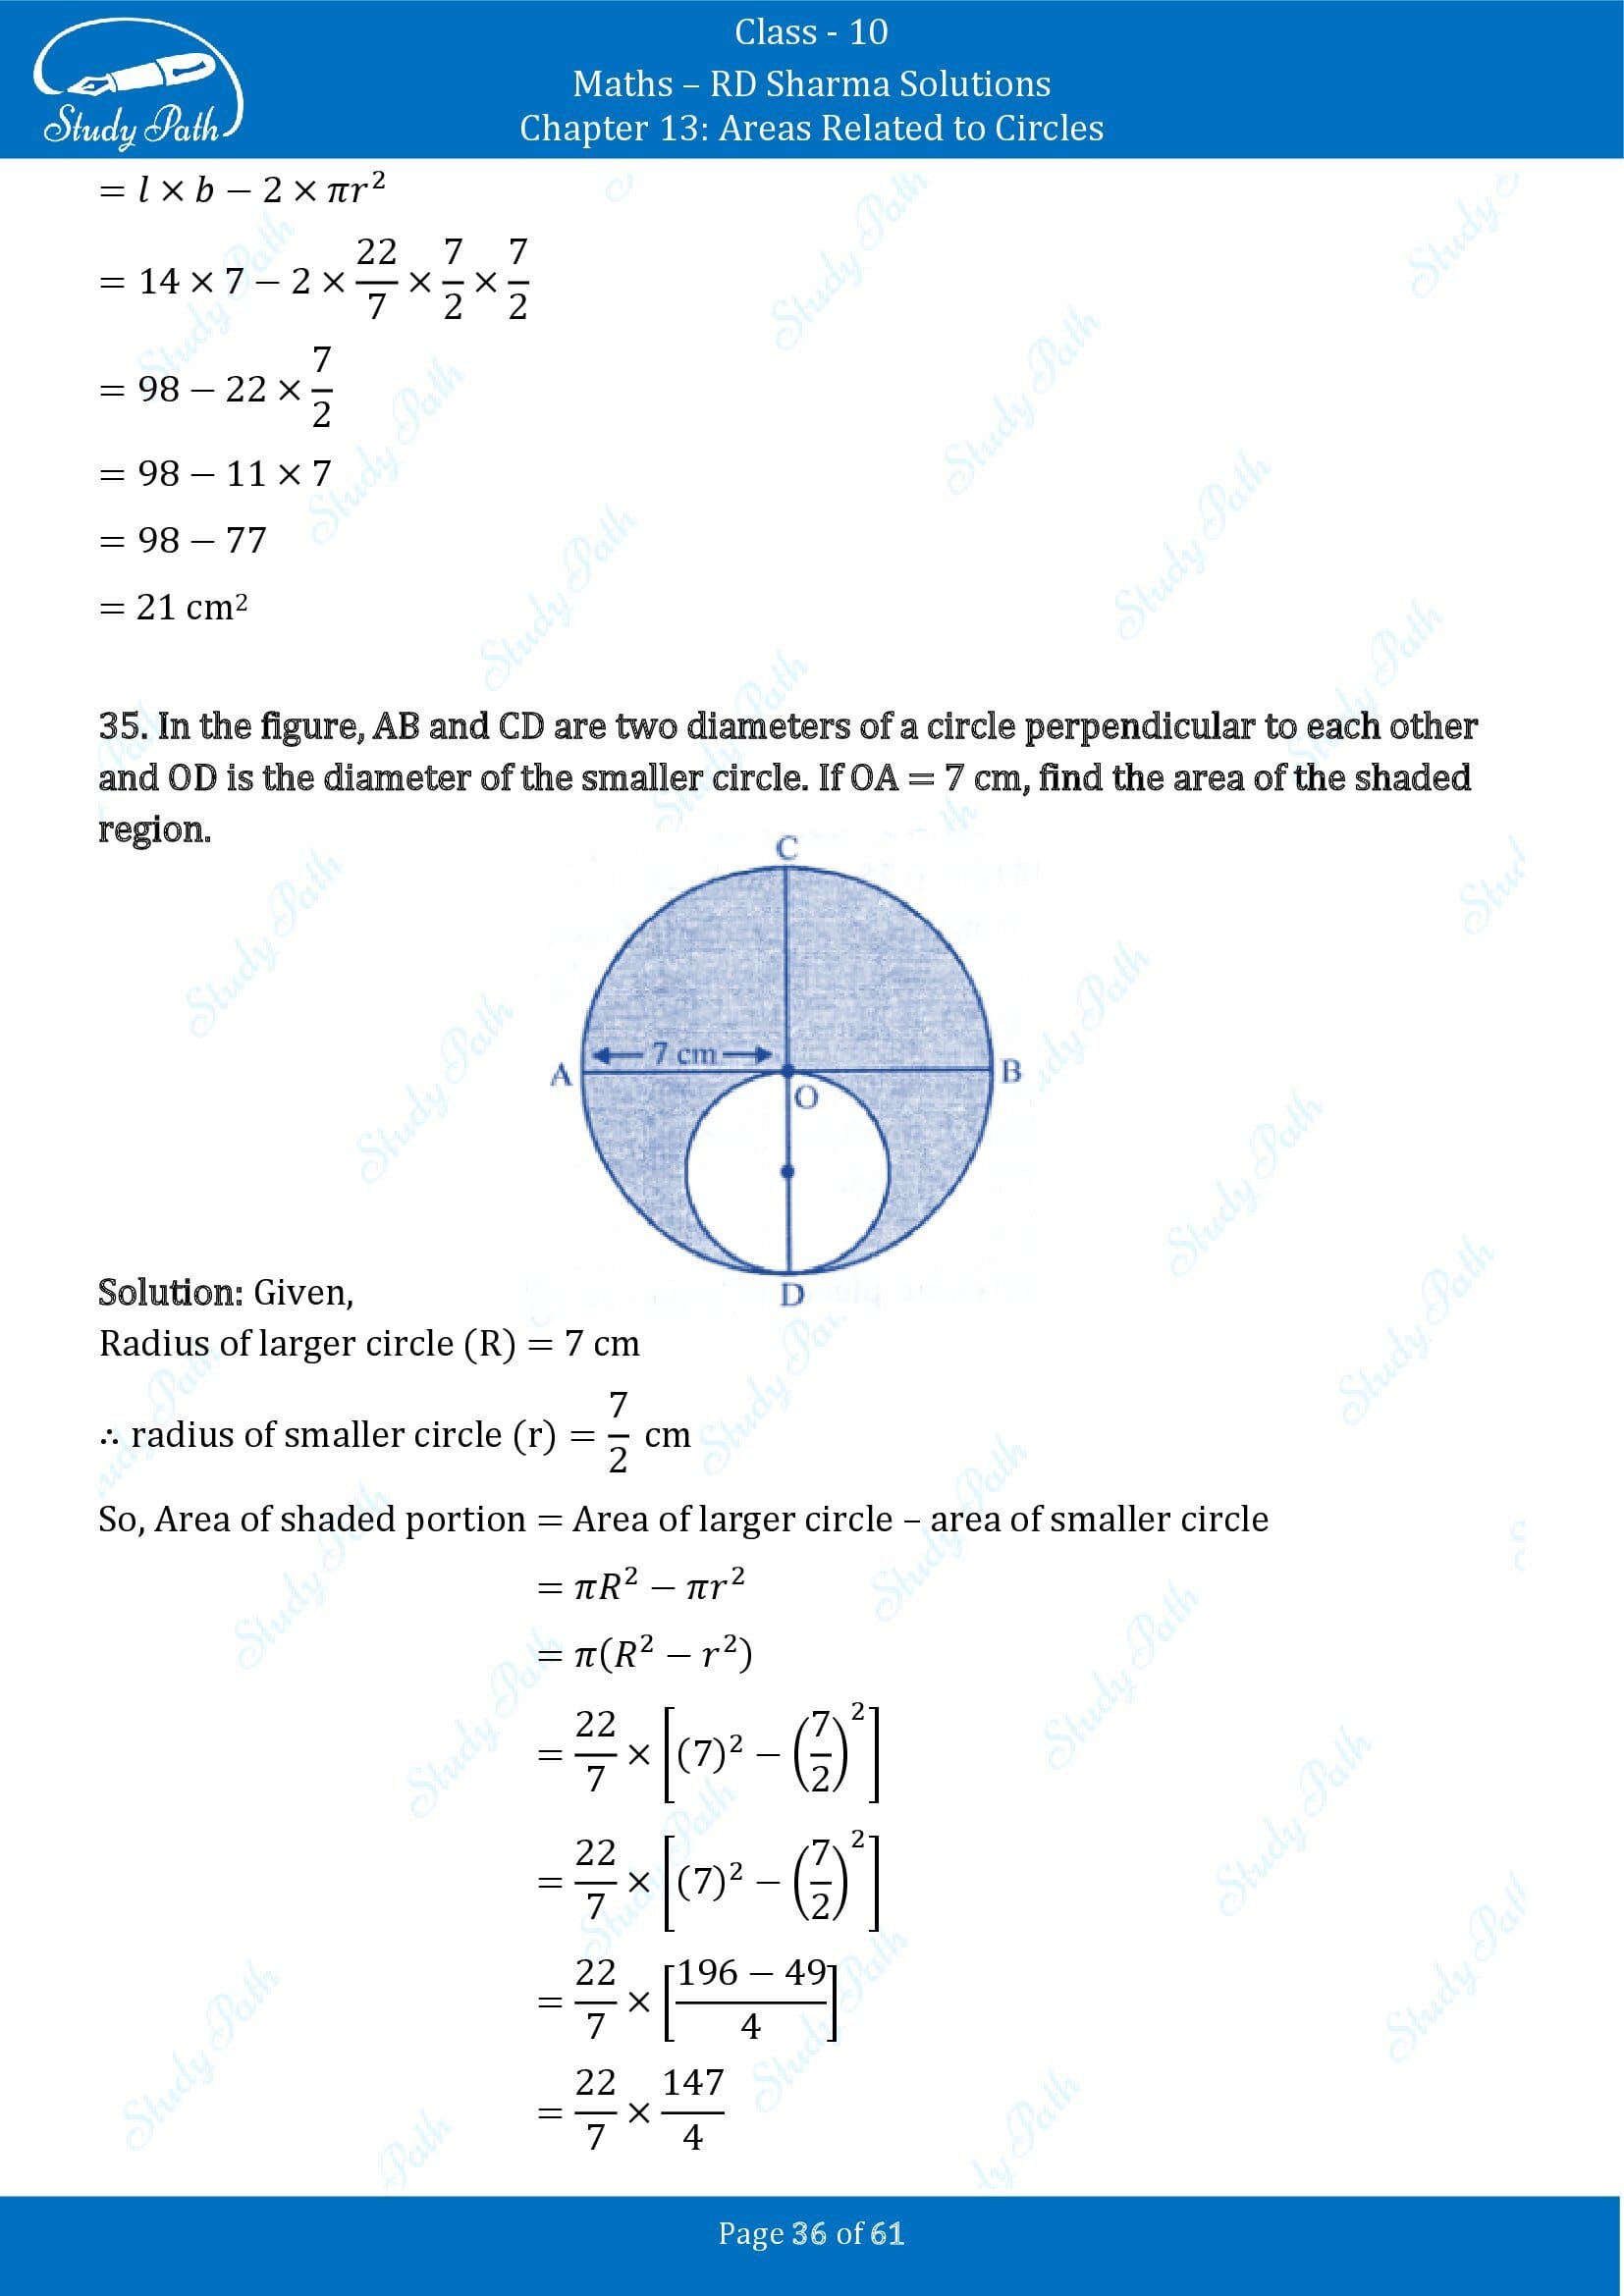 RD Sharma Solutions Class 10 Chapter 13 Areas Related to Circles Exercise 13.4 00036